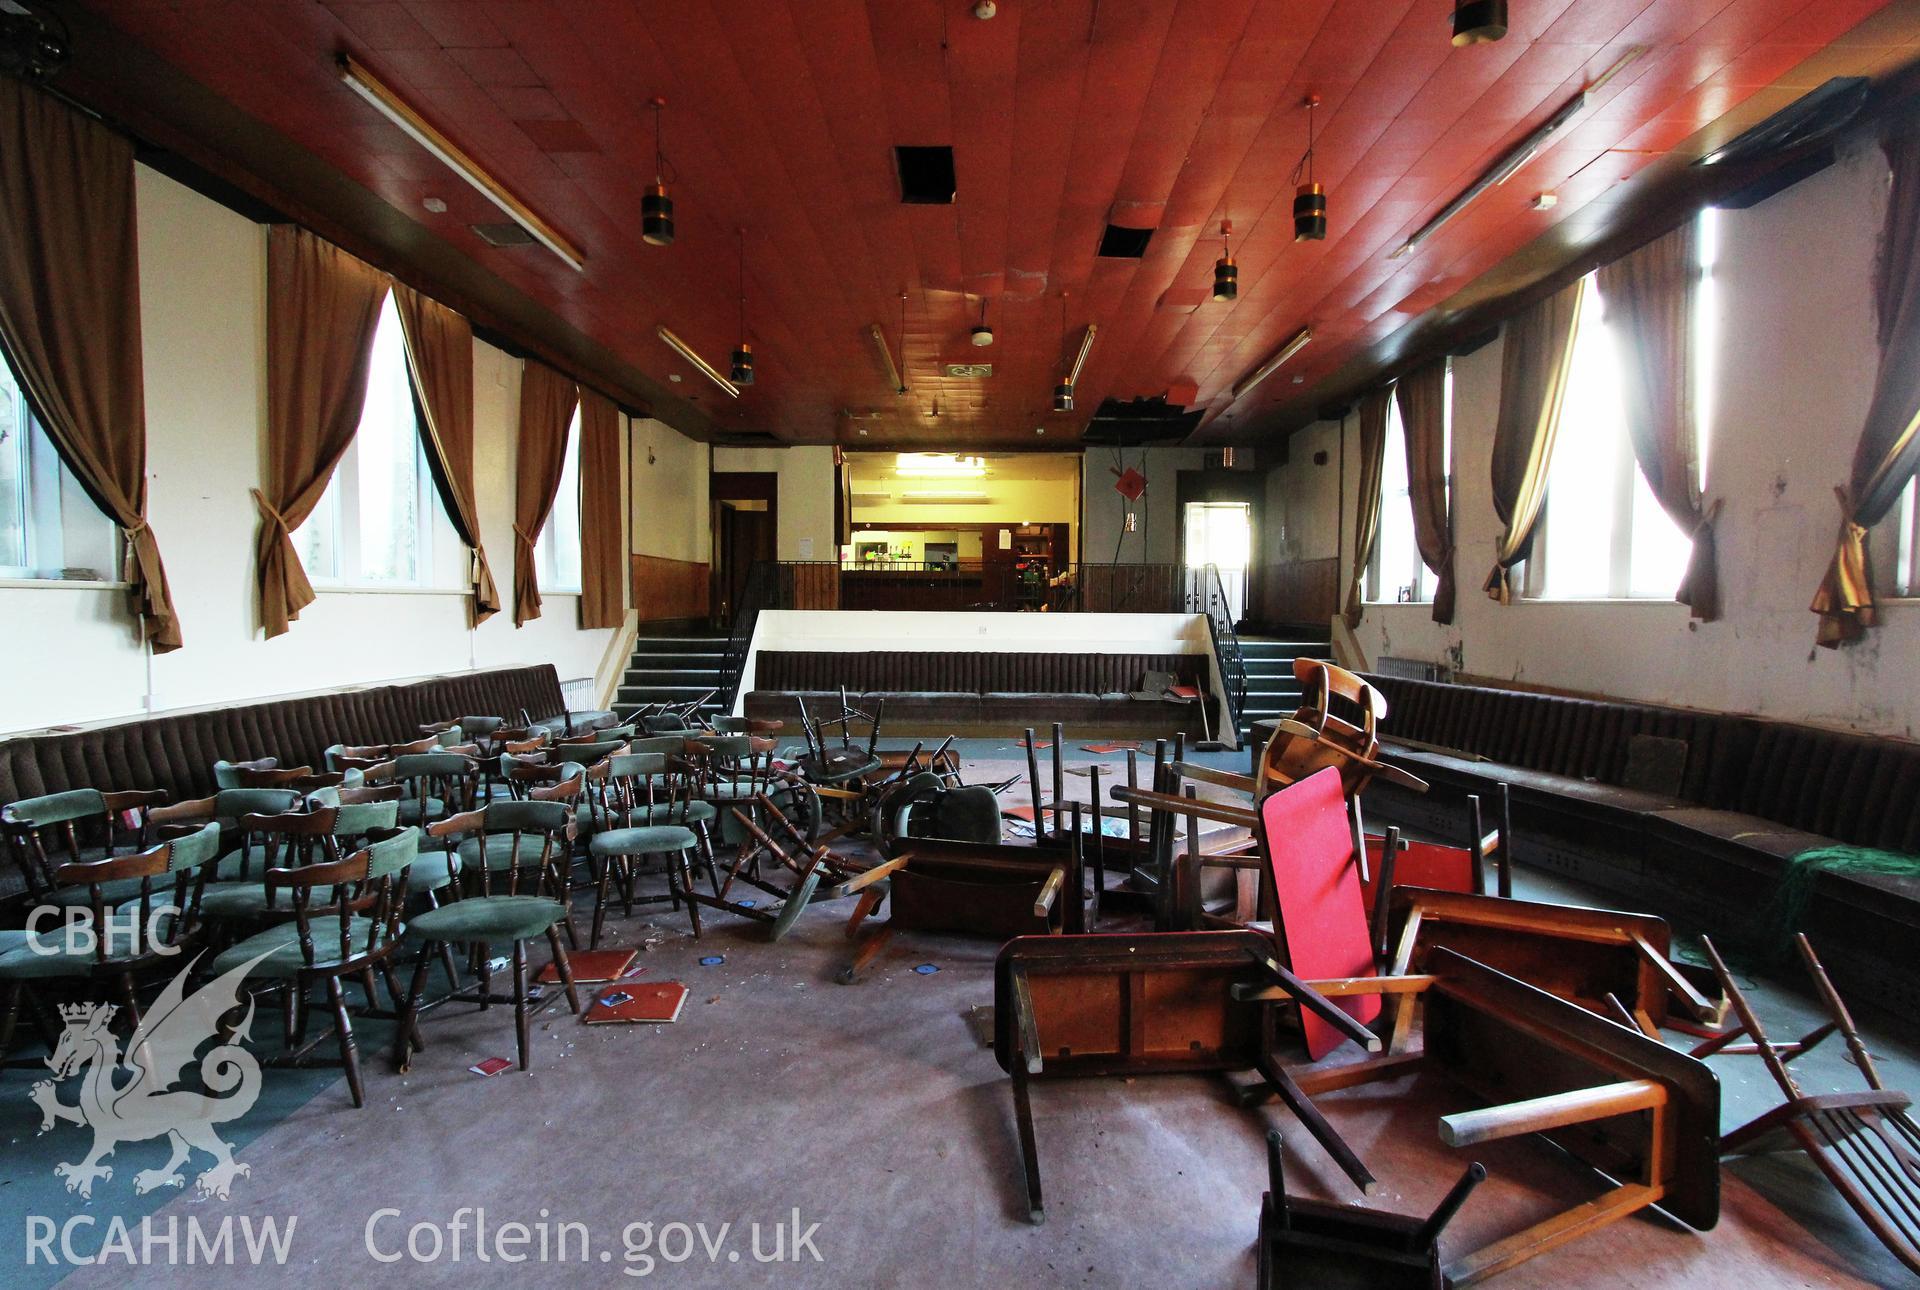 Interior view of the Railway Institute, Bangor. Photographed during survey conducted by Sue Fielding for the RCAHMW on 4th April 2016.